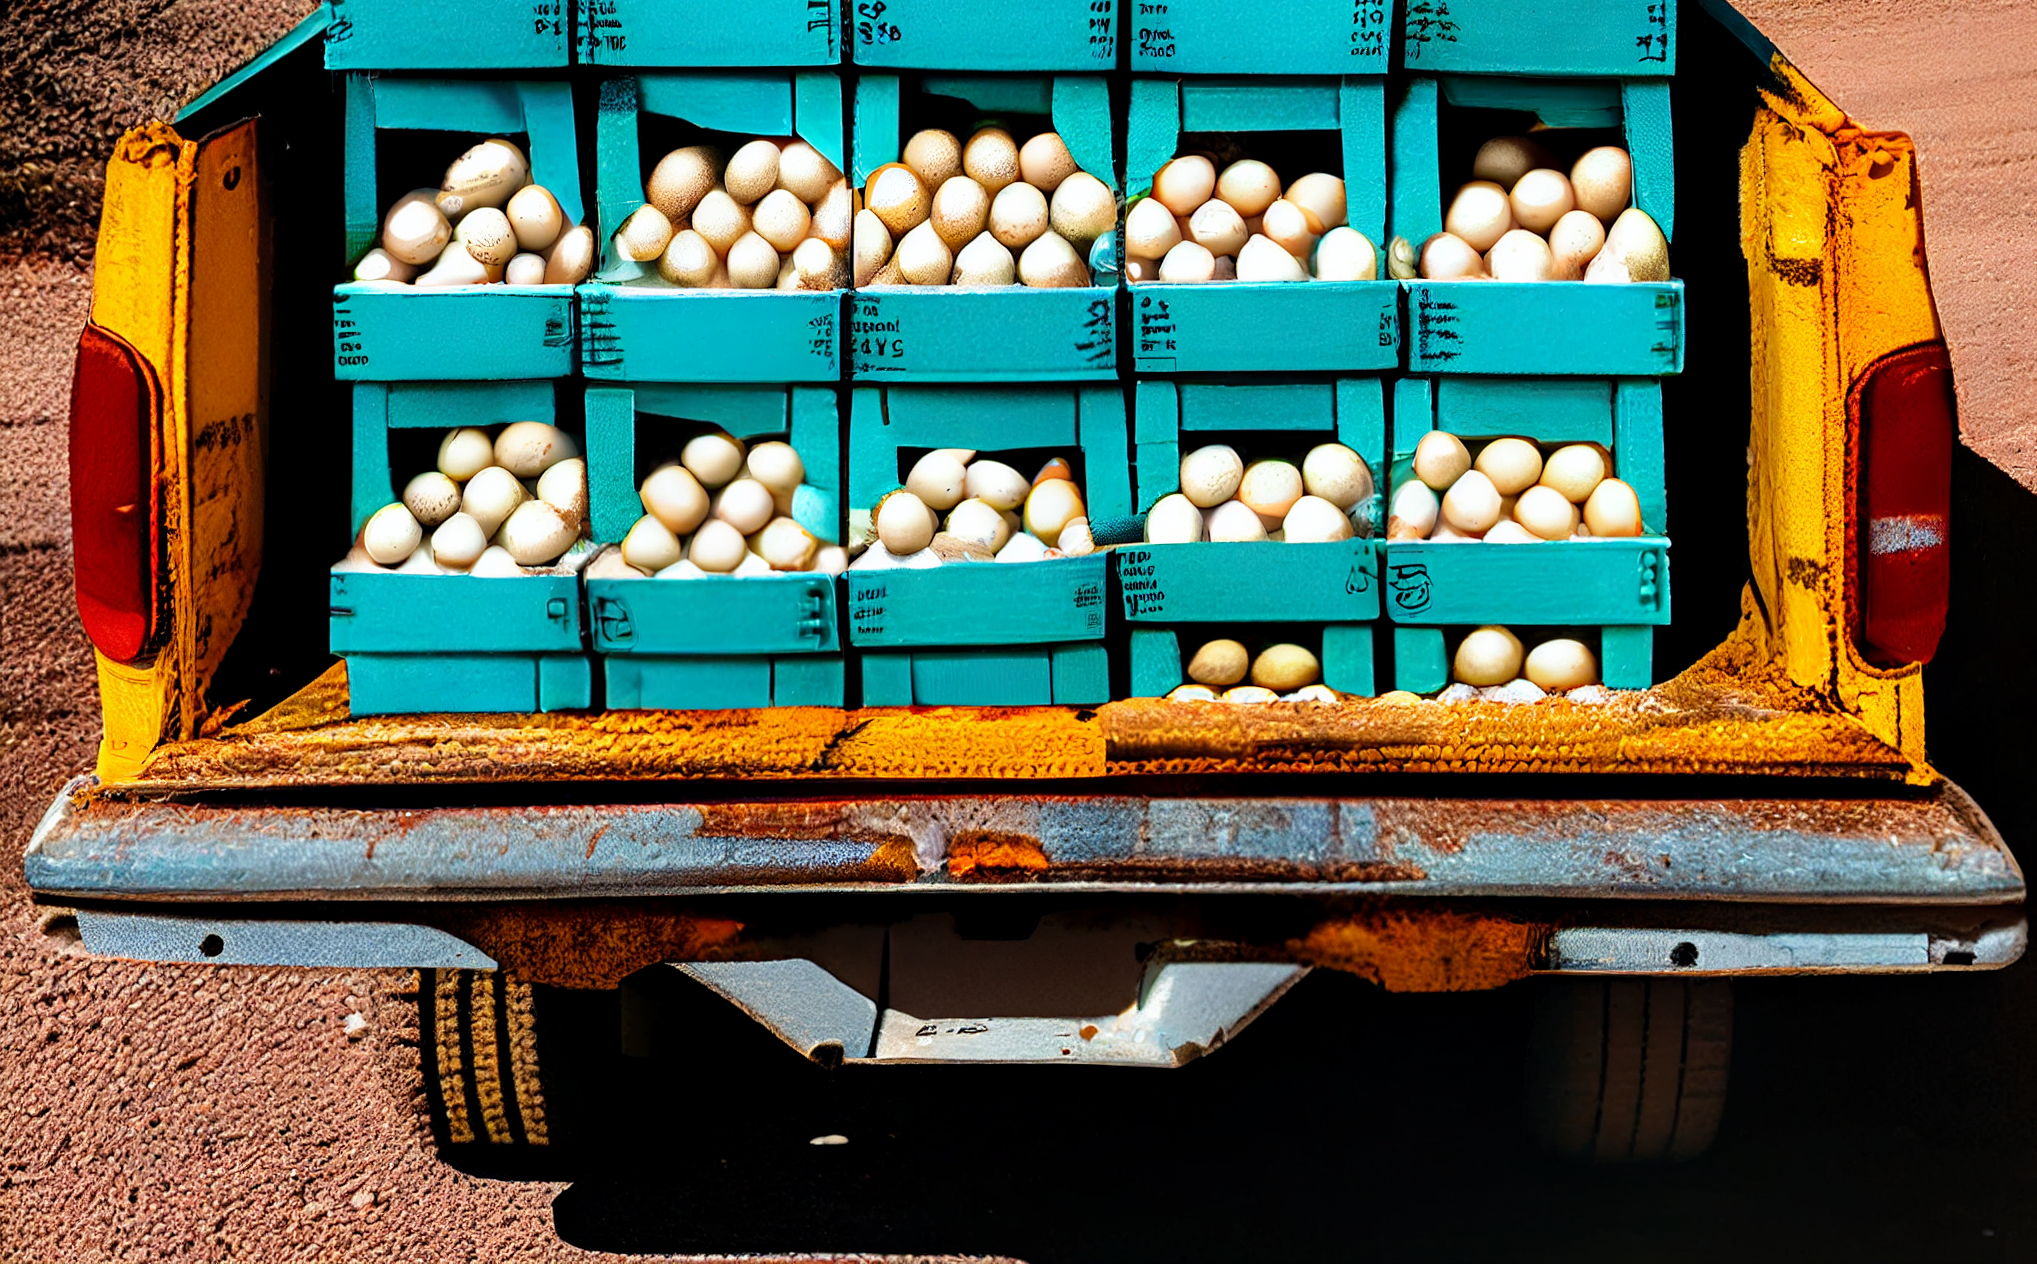 Americans Smuggle Eggs Over Border Due to Soaring Prices